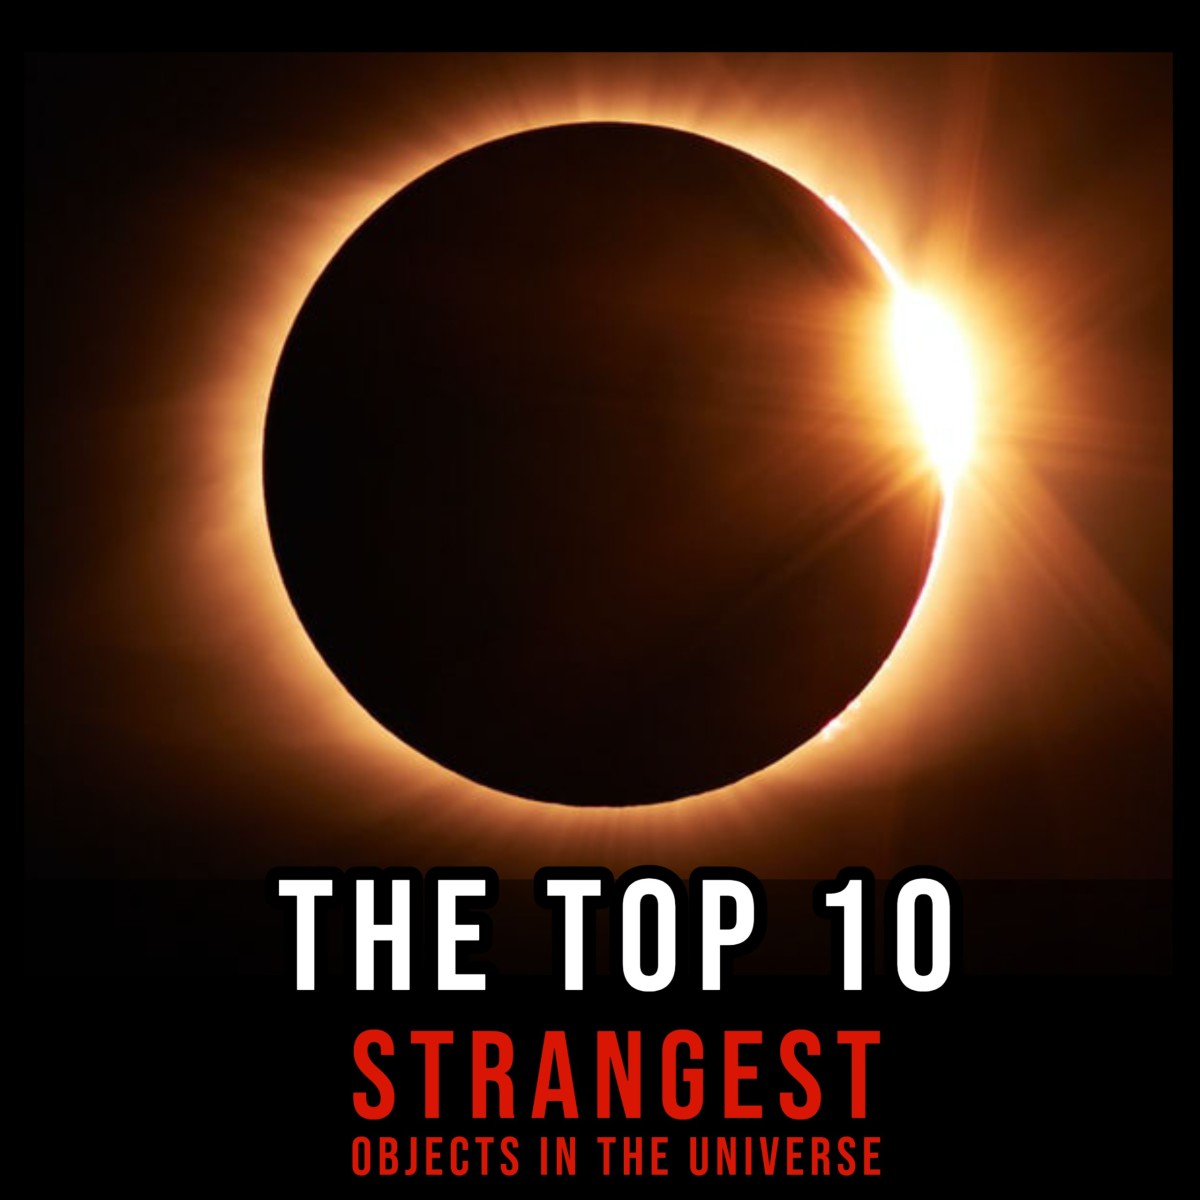 The Top 10 Strangest Objects in the Universe